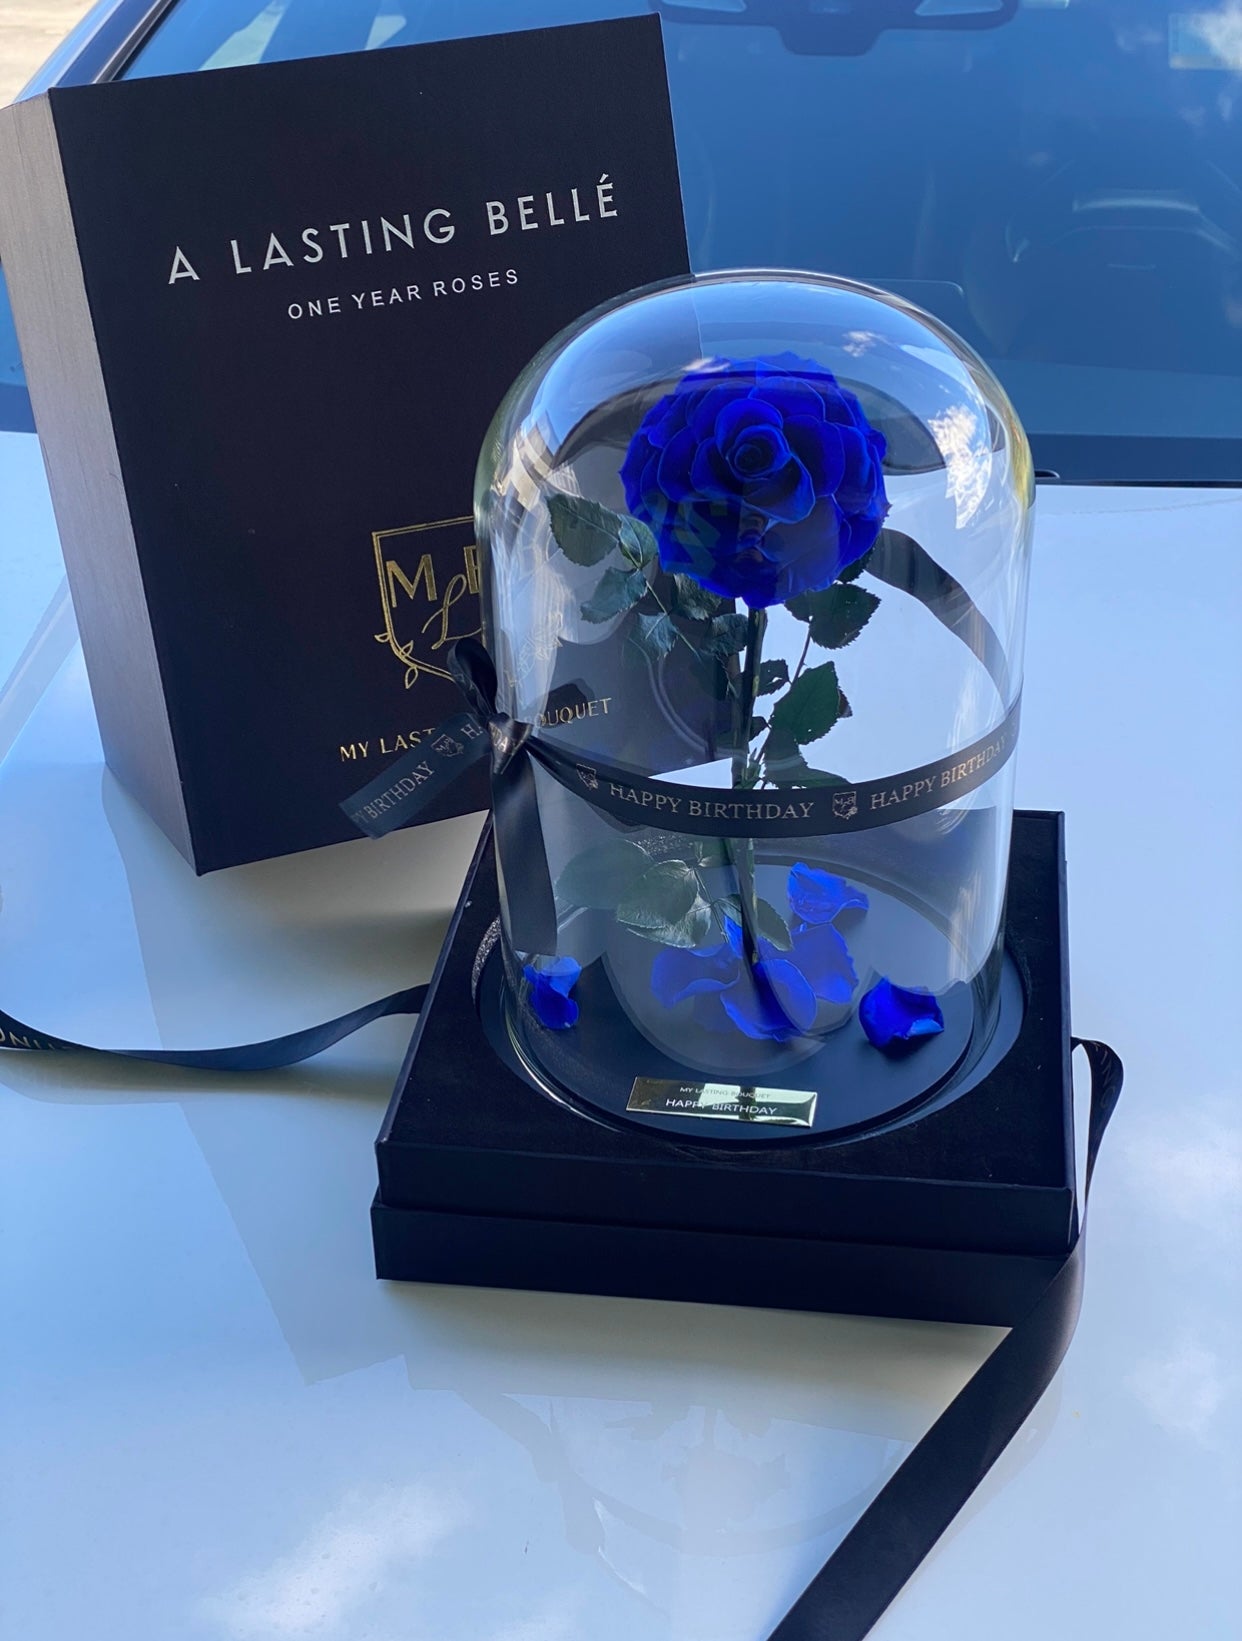 Midnight Blue Lasting Belle - My Lasting Bouquet